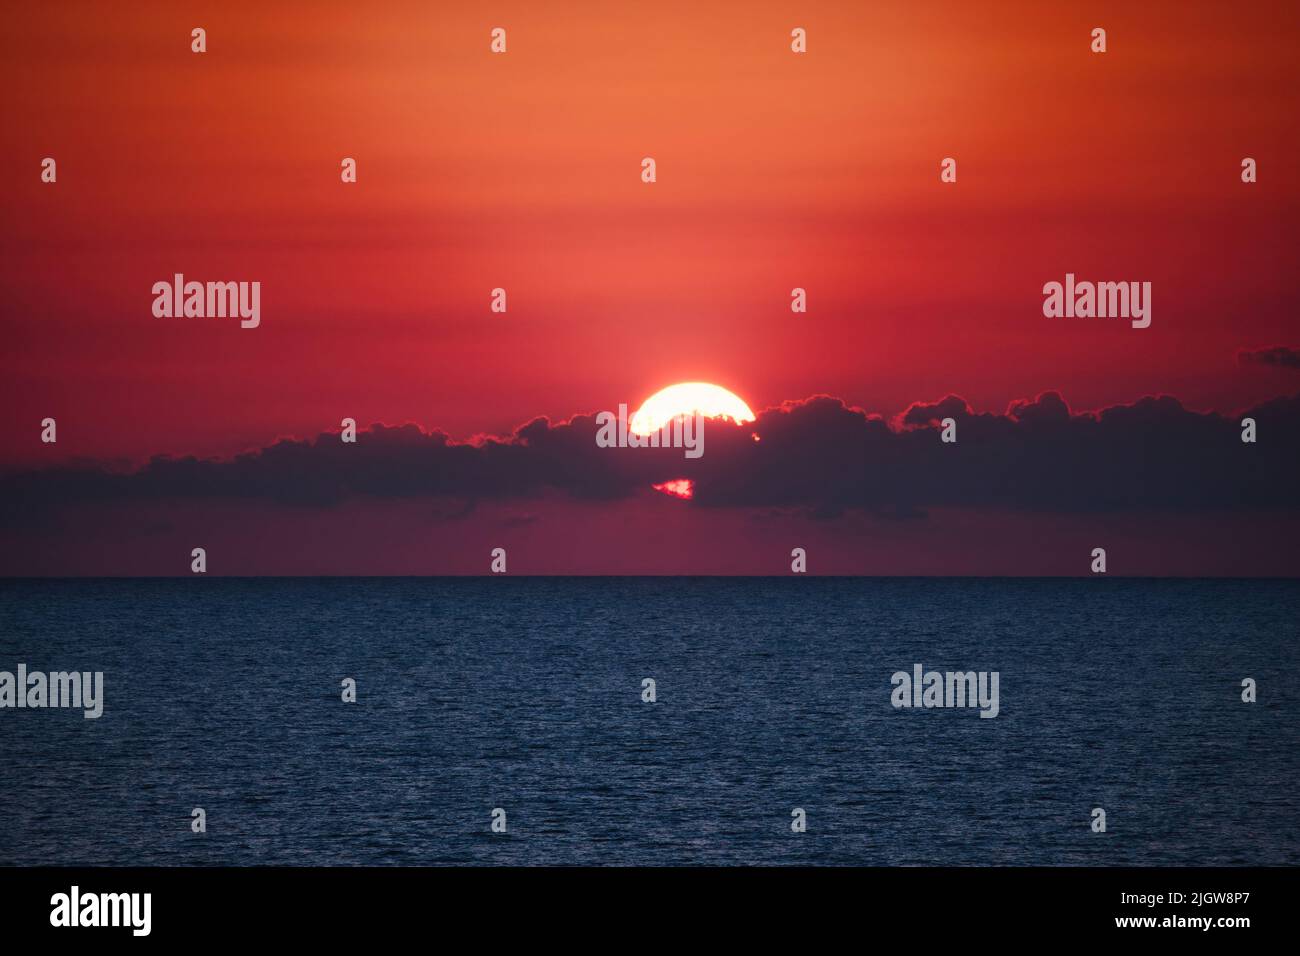 Dramatic sunset over the ocean horizon at dusk with clouds partly covering the sun against a deep red sky background - dreamy glowing light fading int Stock Photo